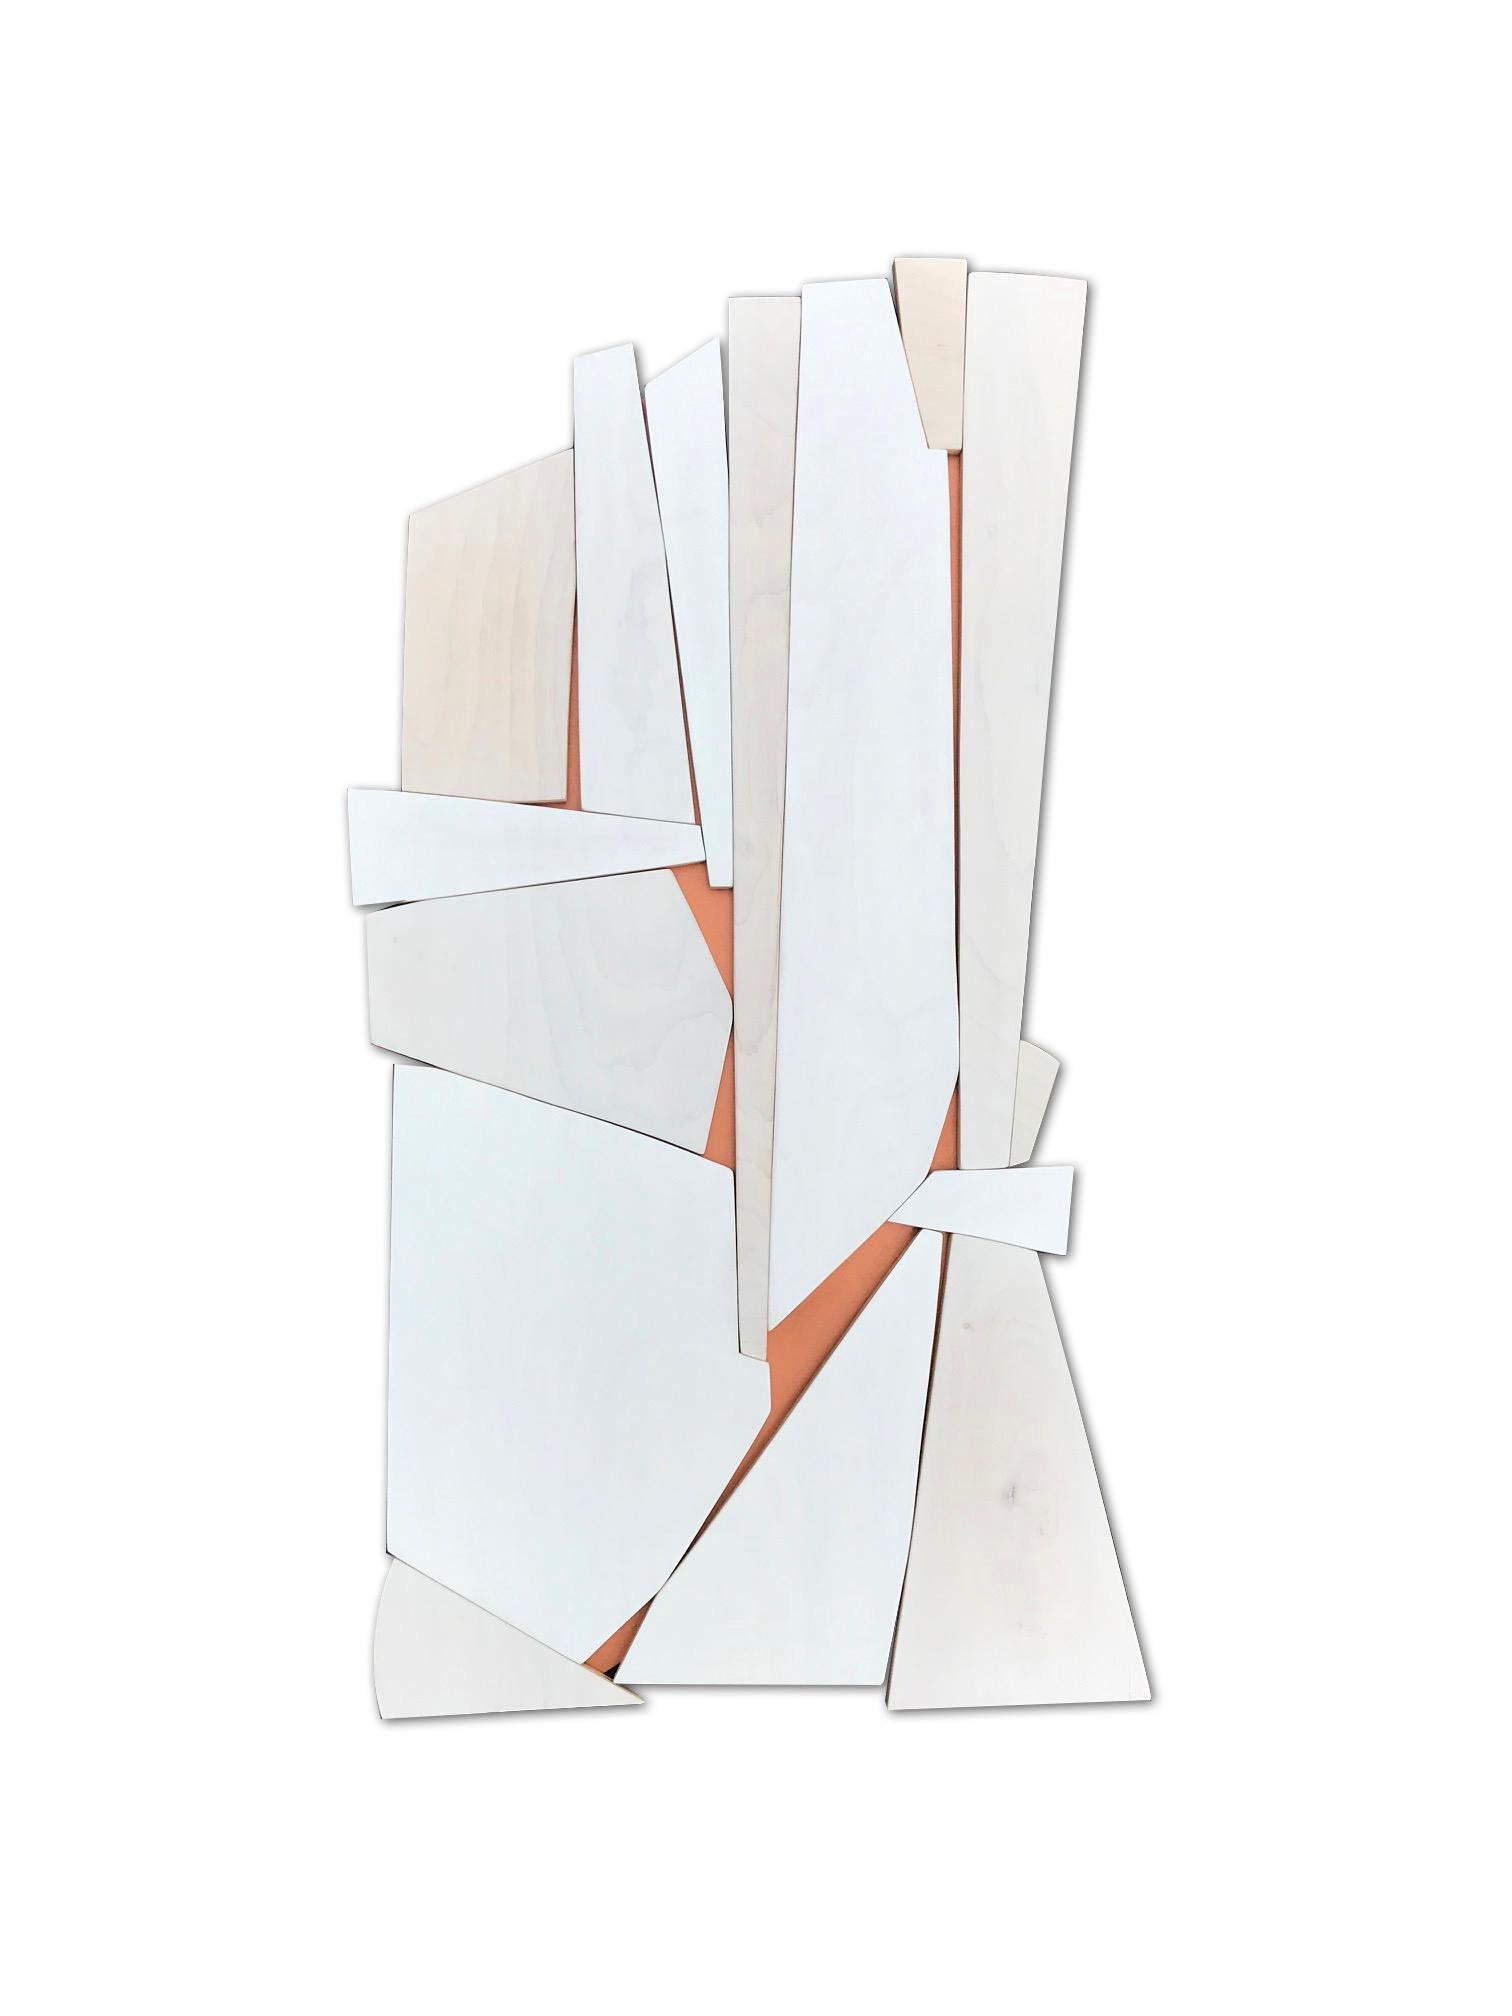 Scott Troxel Abstract Painting - Cathedral 2 (wood modern monochrome wall sculpture minimal geometric design